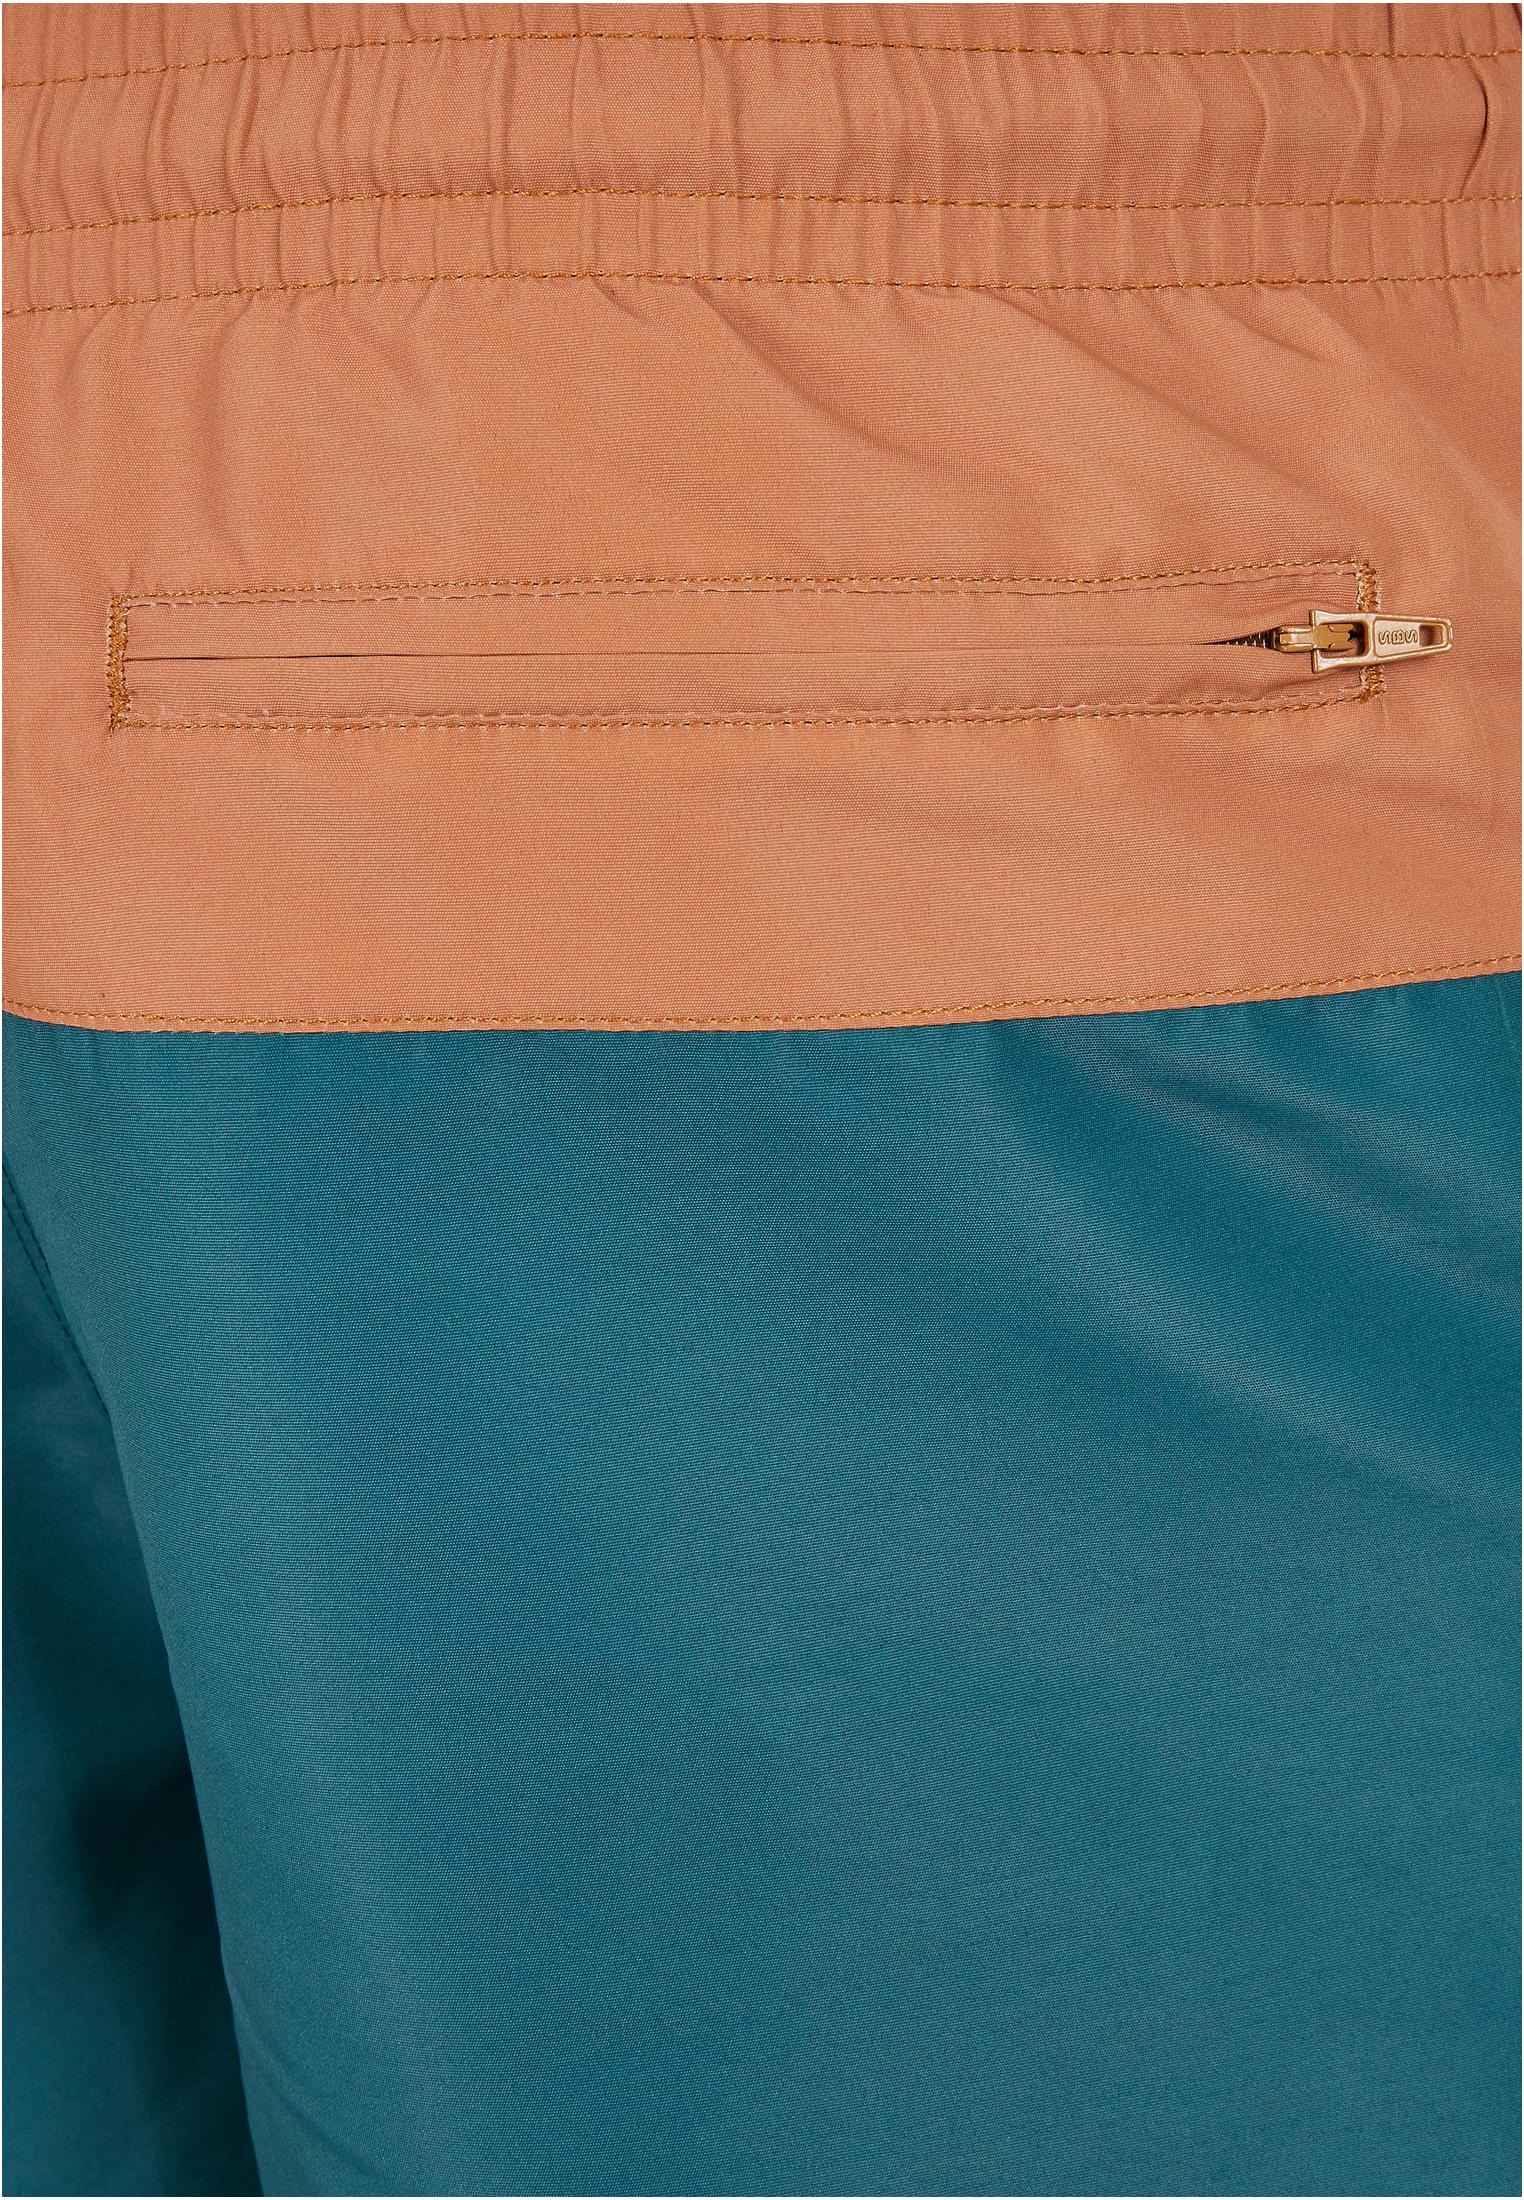 Plus Size Block Swim Shorts in Farbe teal/toffee